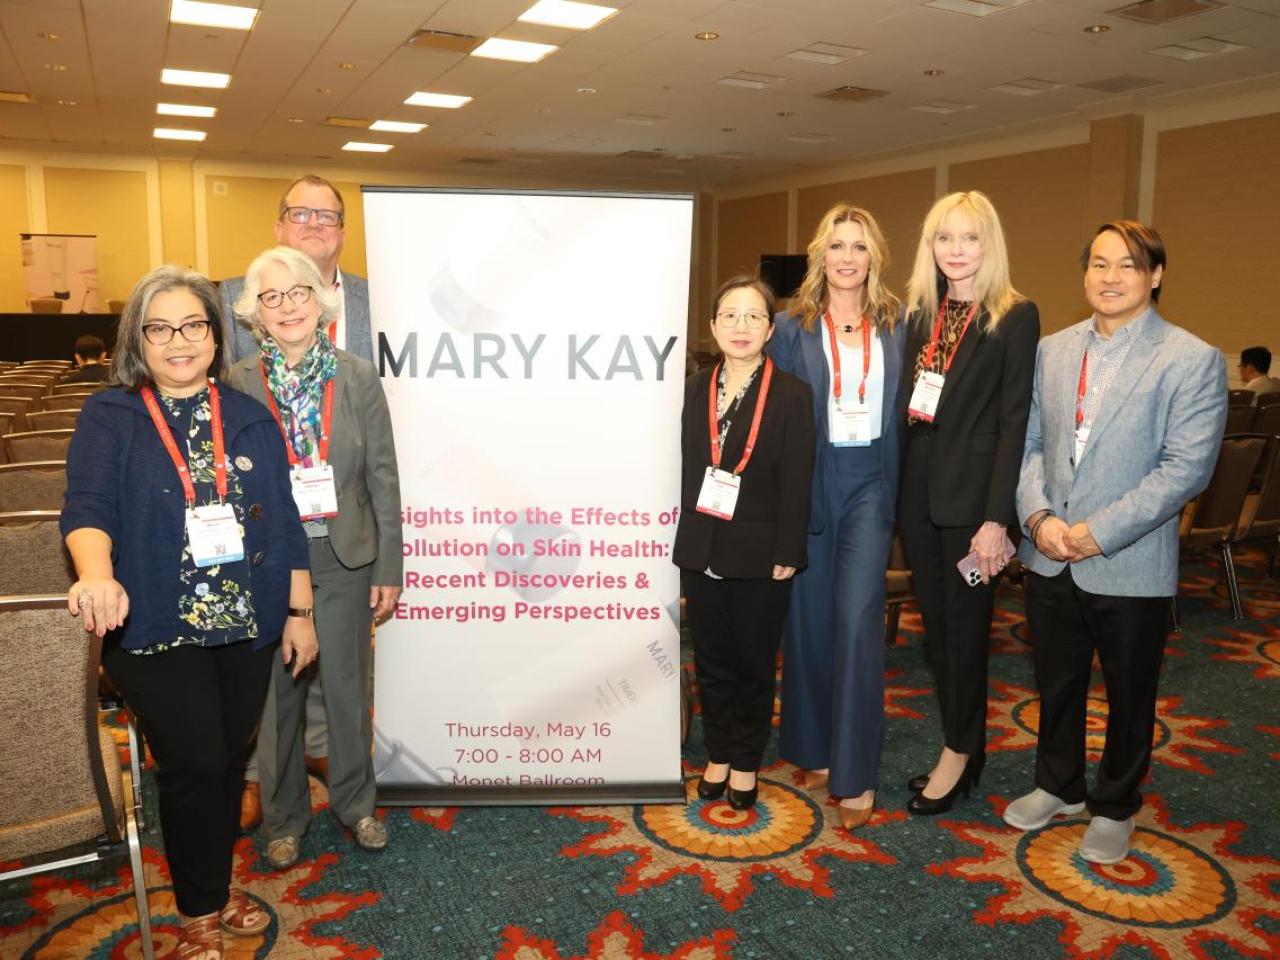 A group posed by a sign "Mary Kay" in a conference room.